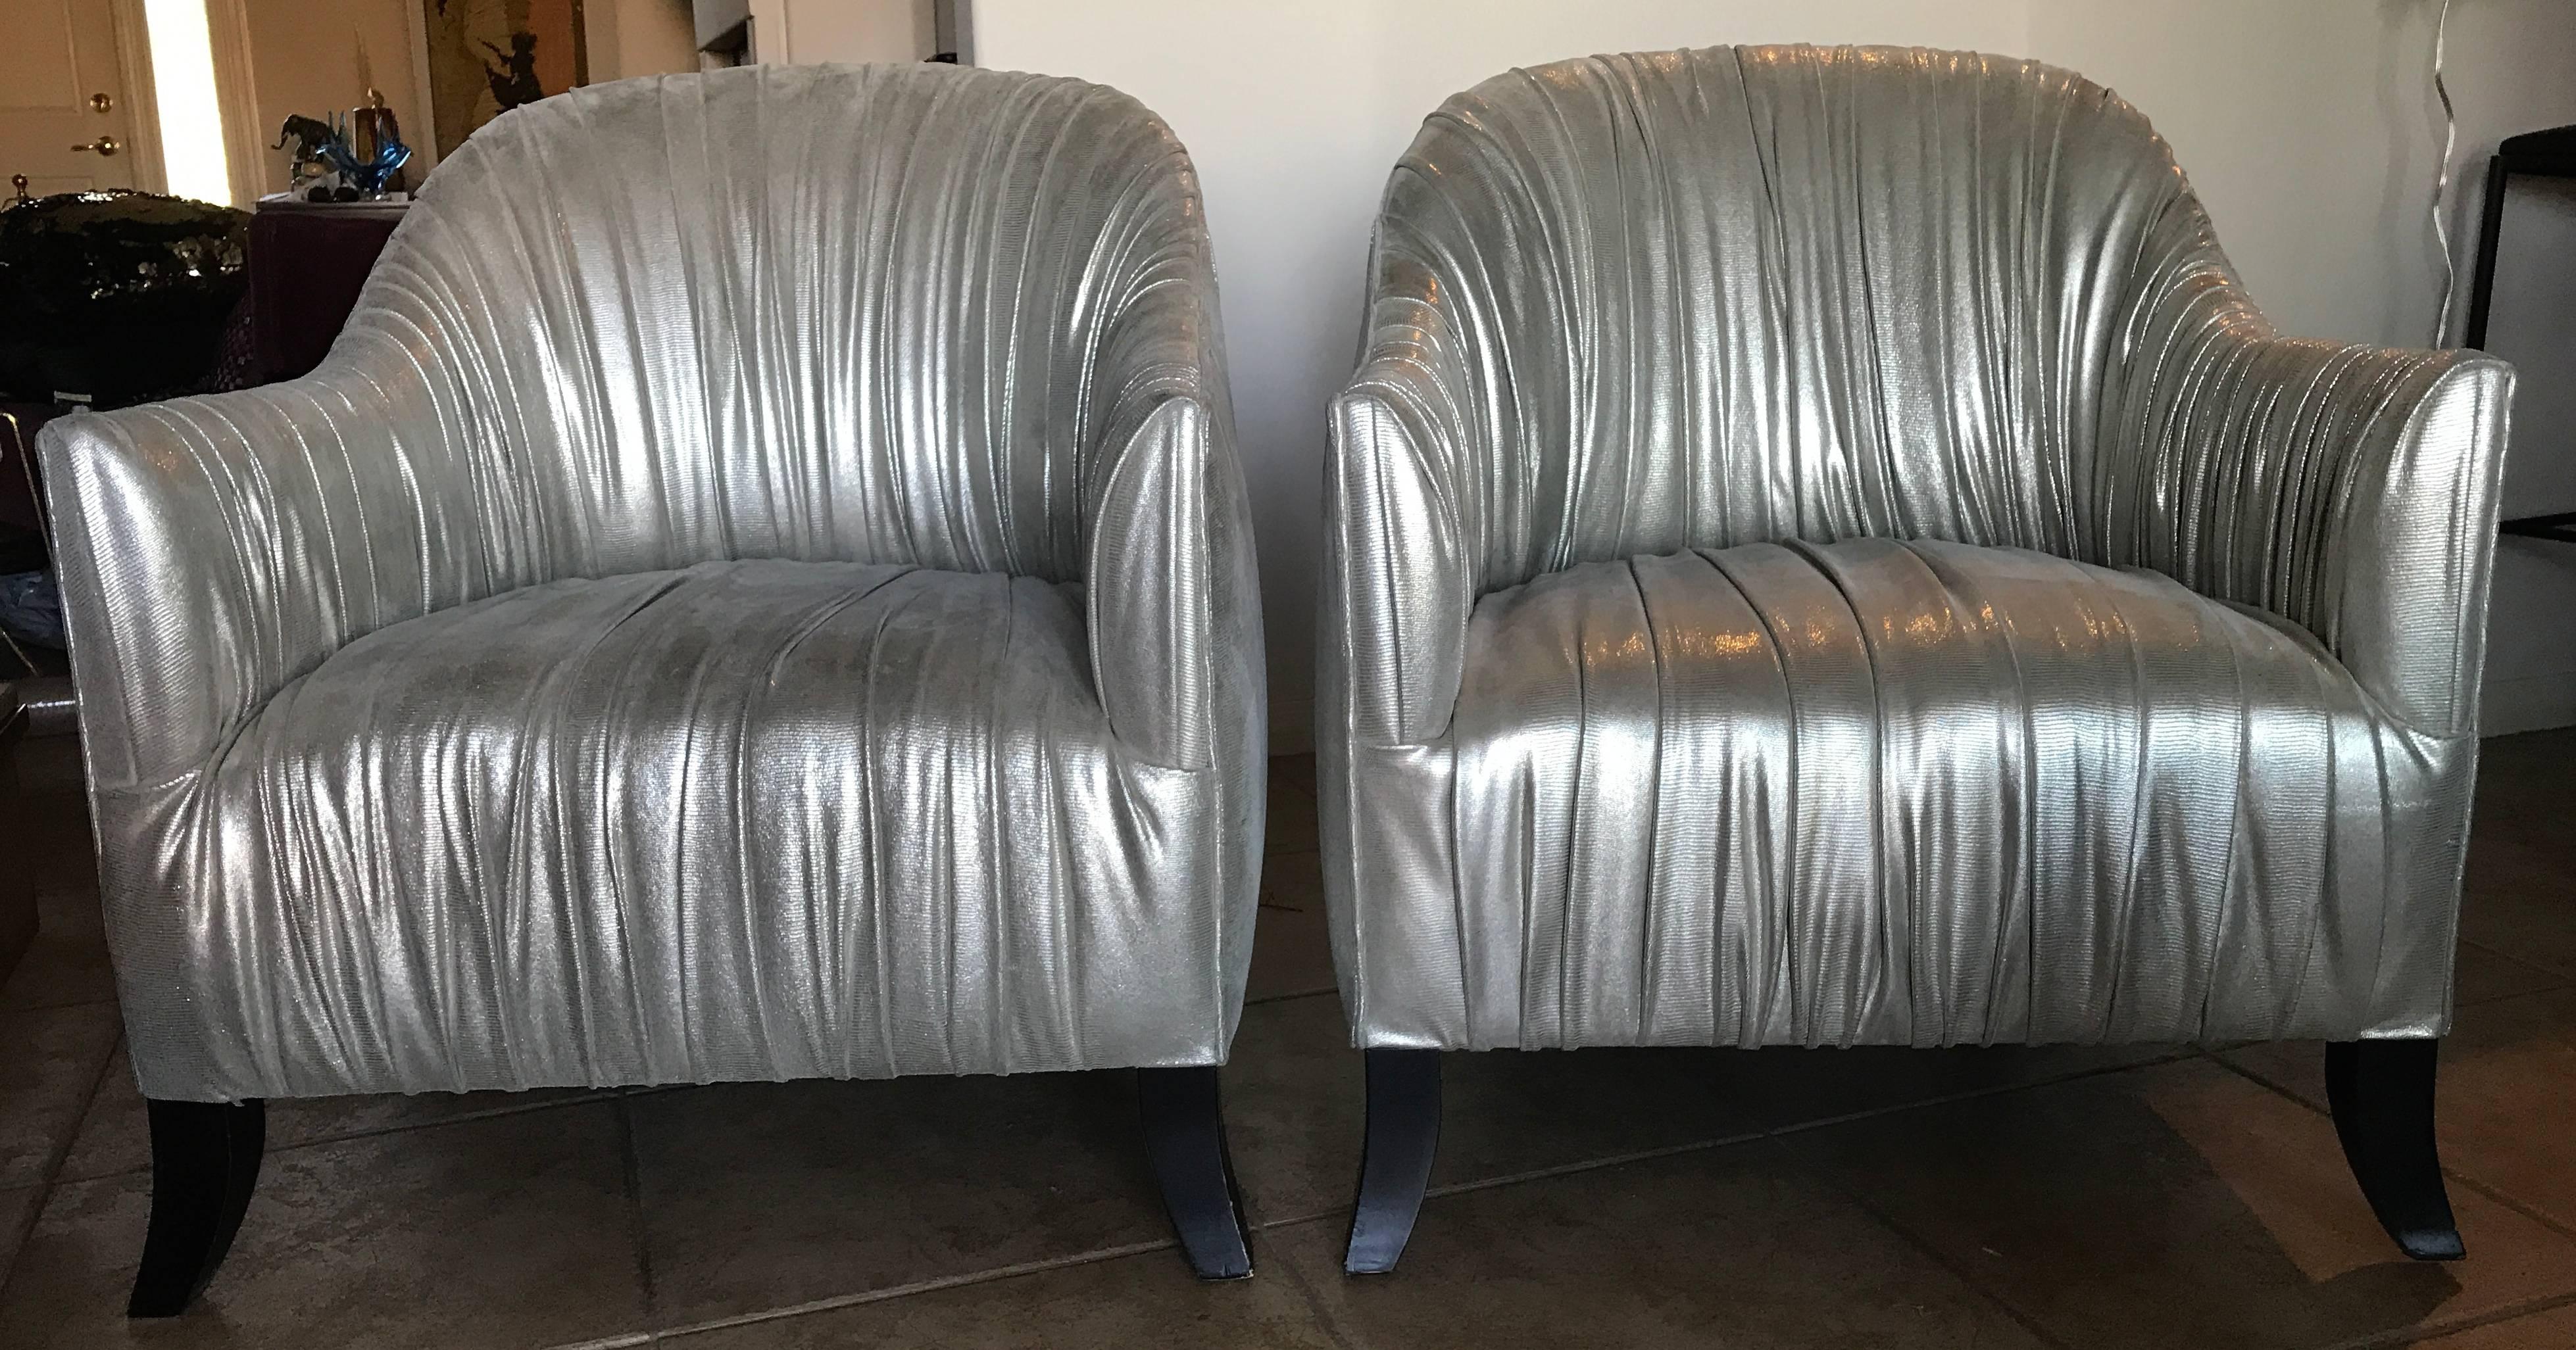  Pair of Hollywood Regency Modern Ruched Silver Metallic Leather Club Chairs 1